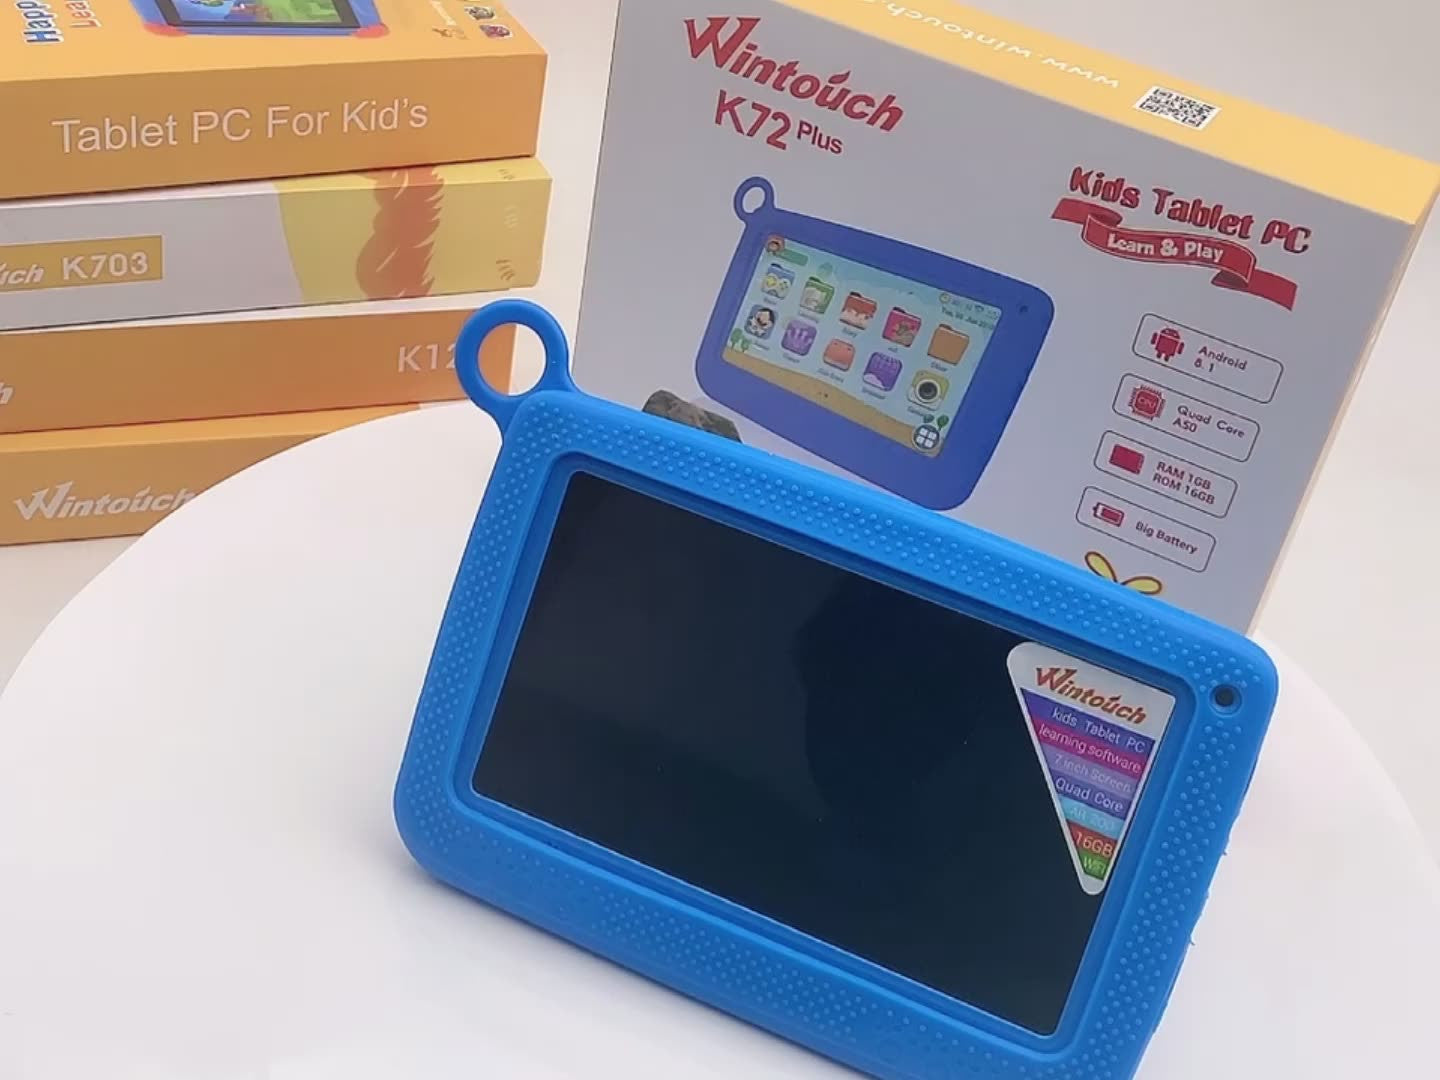 Wintouch K72P tablet